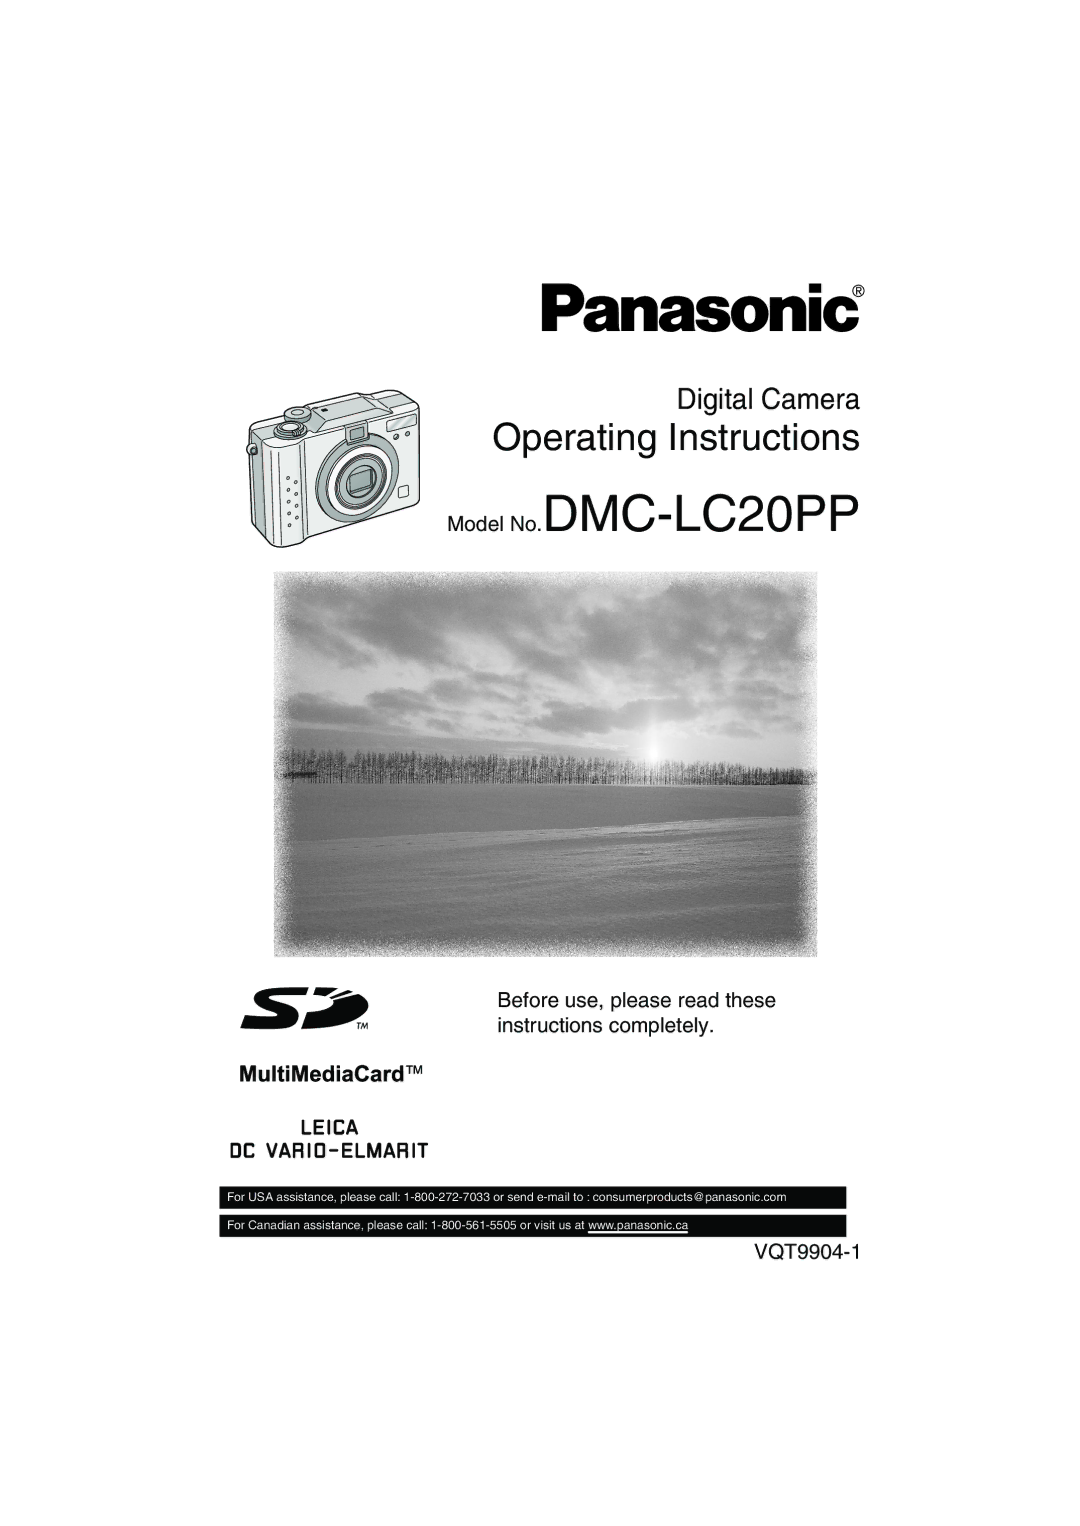 Panasonic DMC-LC20PP operating instructions Before use, please read these instructions completely, VQT9904-1 